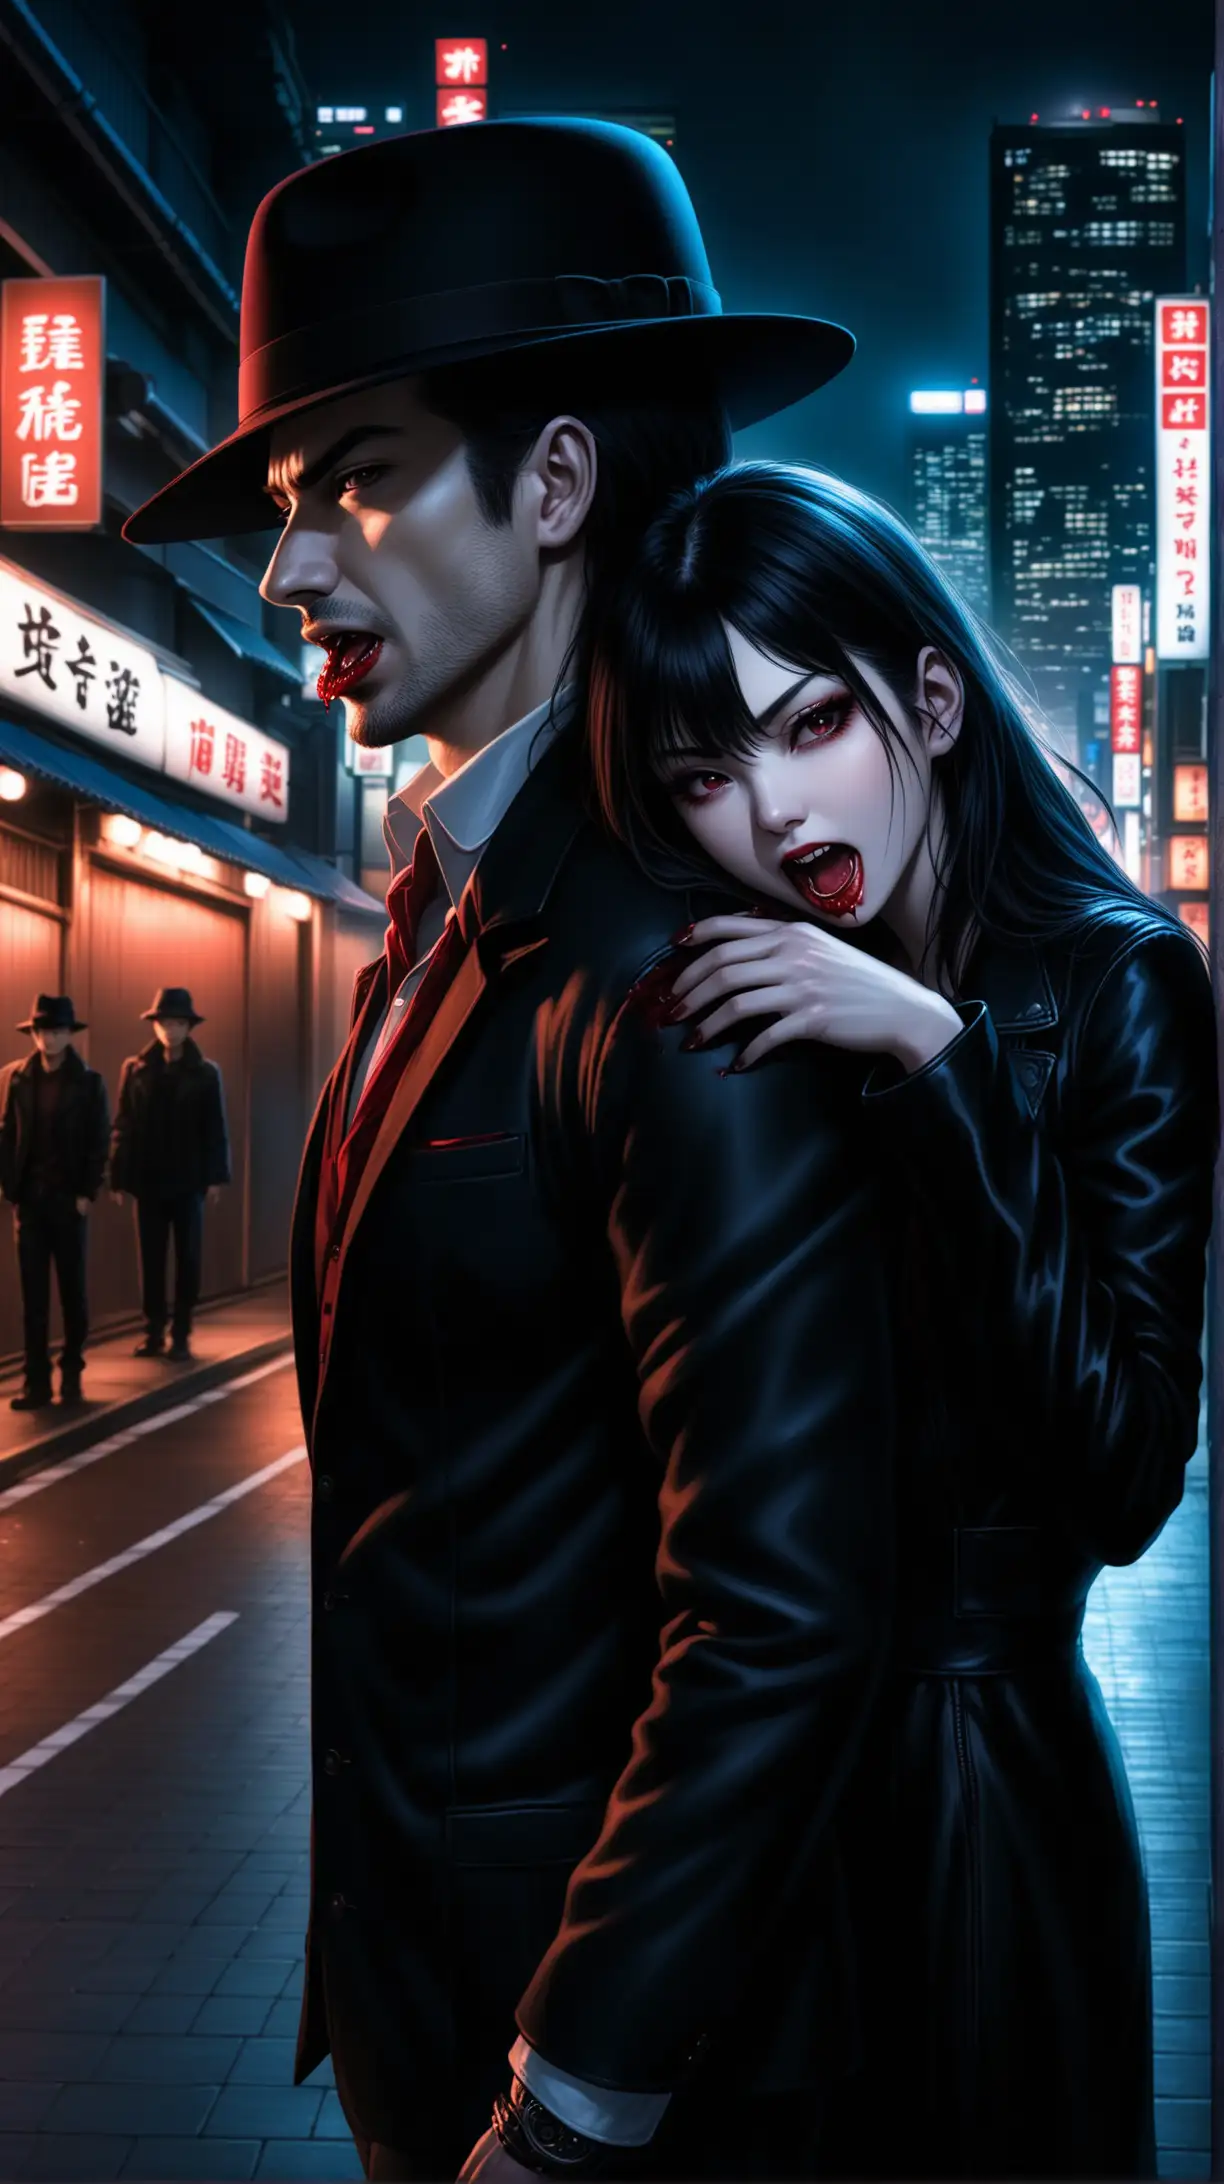 the vampire girl is sucking blood from behind from the neck of an ordinary male in  hat and jacket, tokyo street in the night on background, dark style, hyper-realistic, photo-realistic